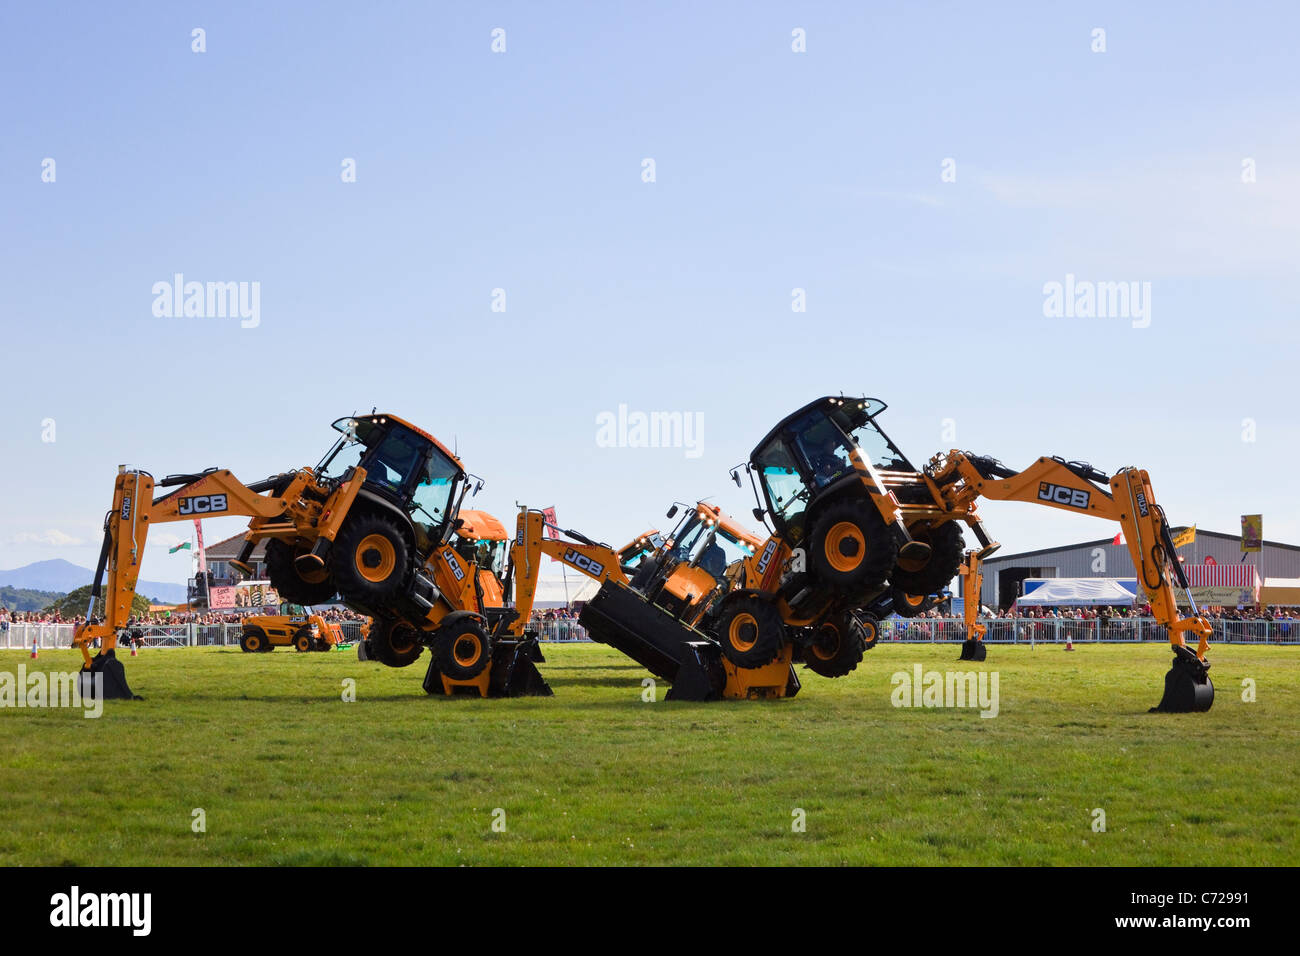 Mona, Isle of Anglesey, North Wales, UK. JCB Bagger Anzeige tanzen in Anglesey County Show in der Mona showground Stockfoto